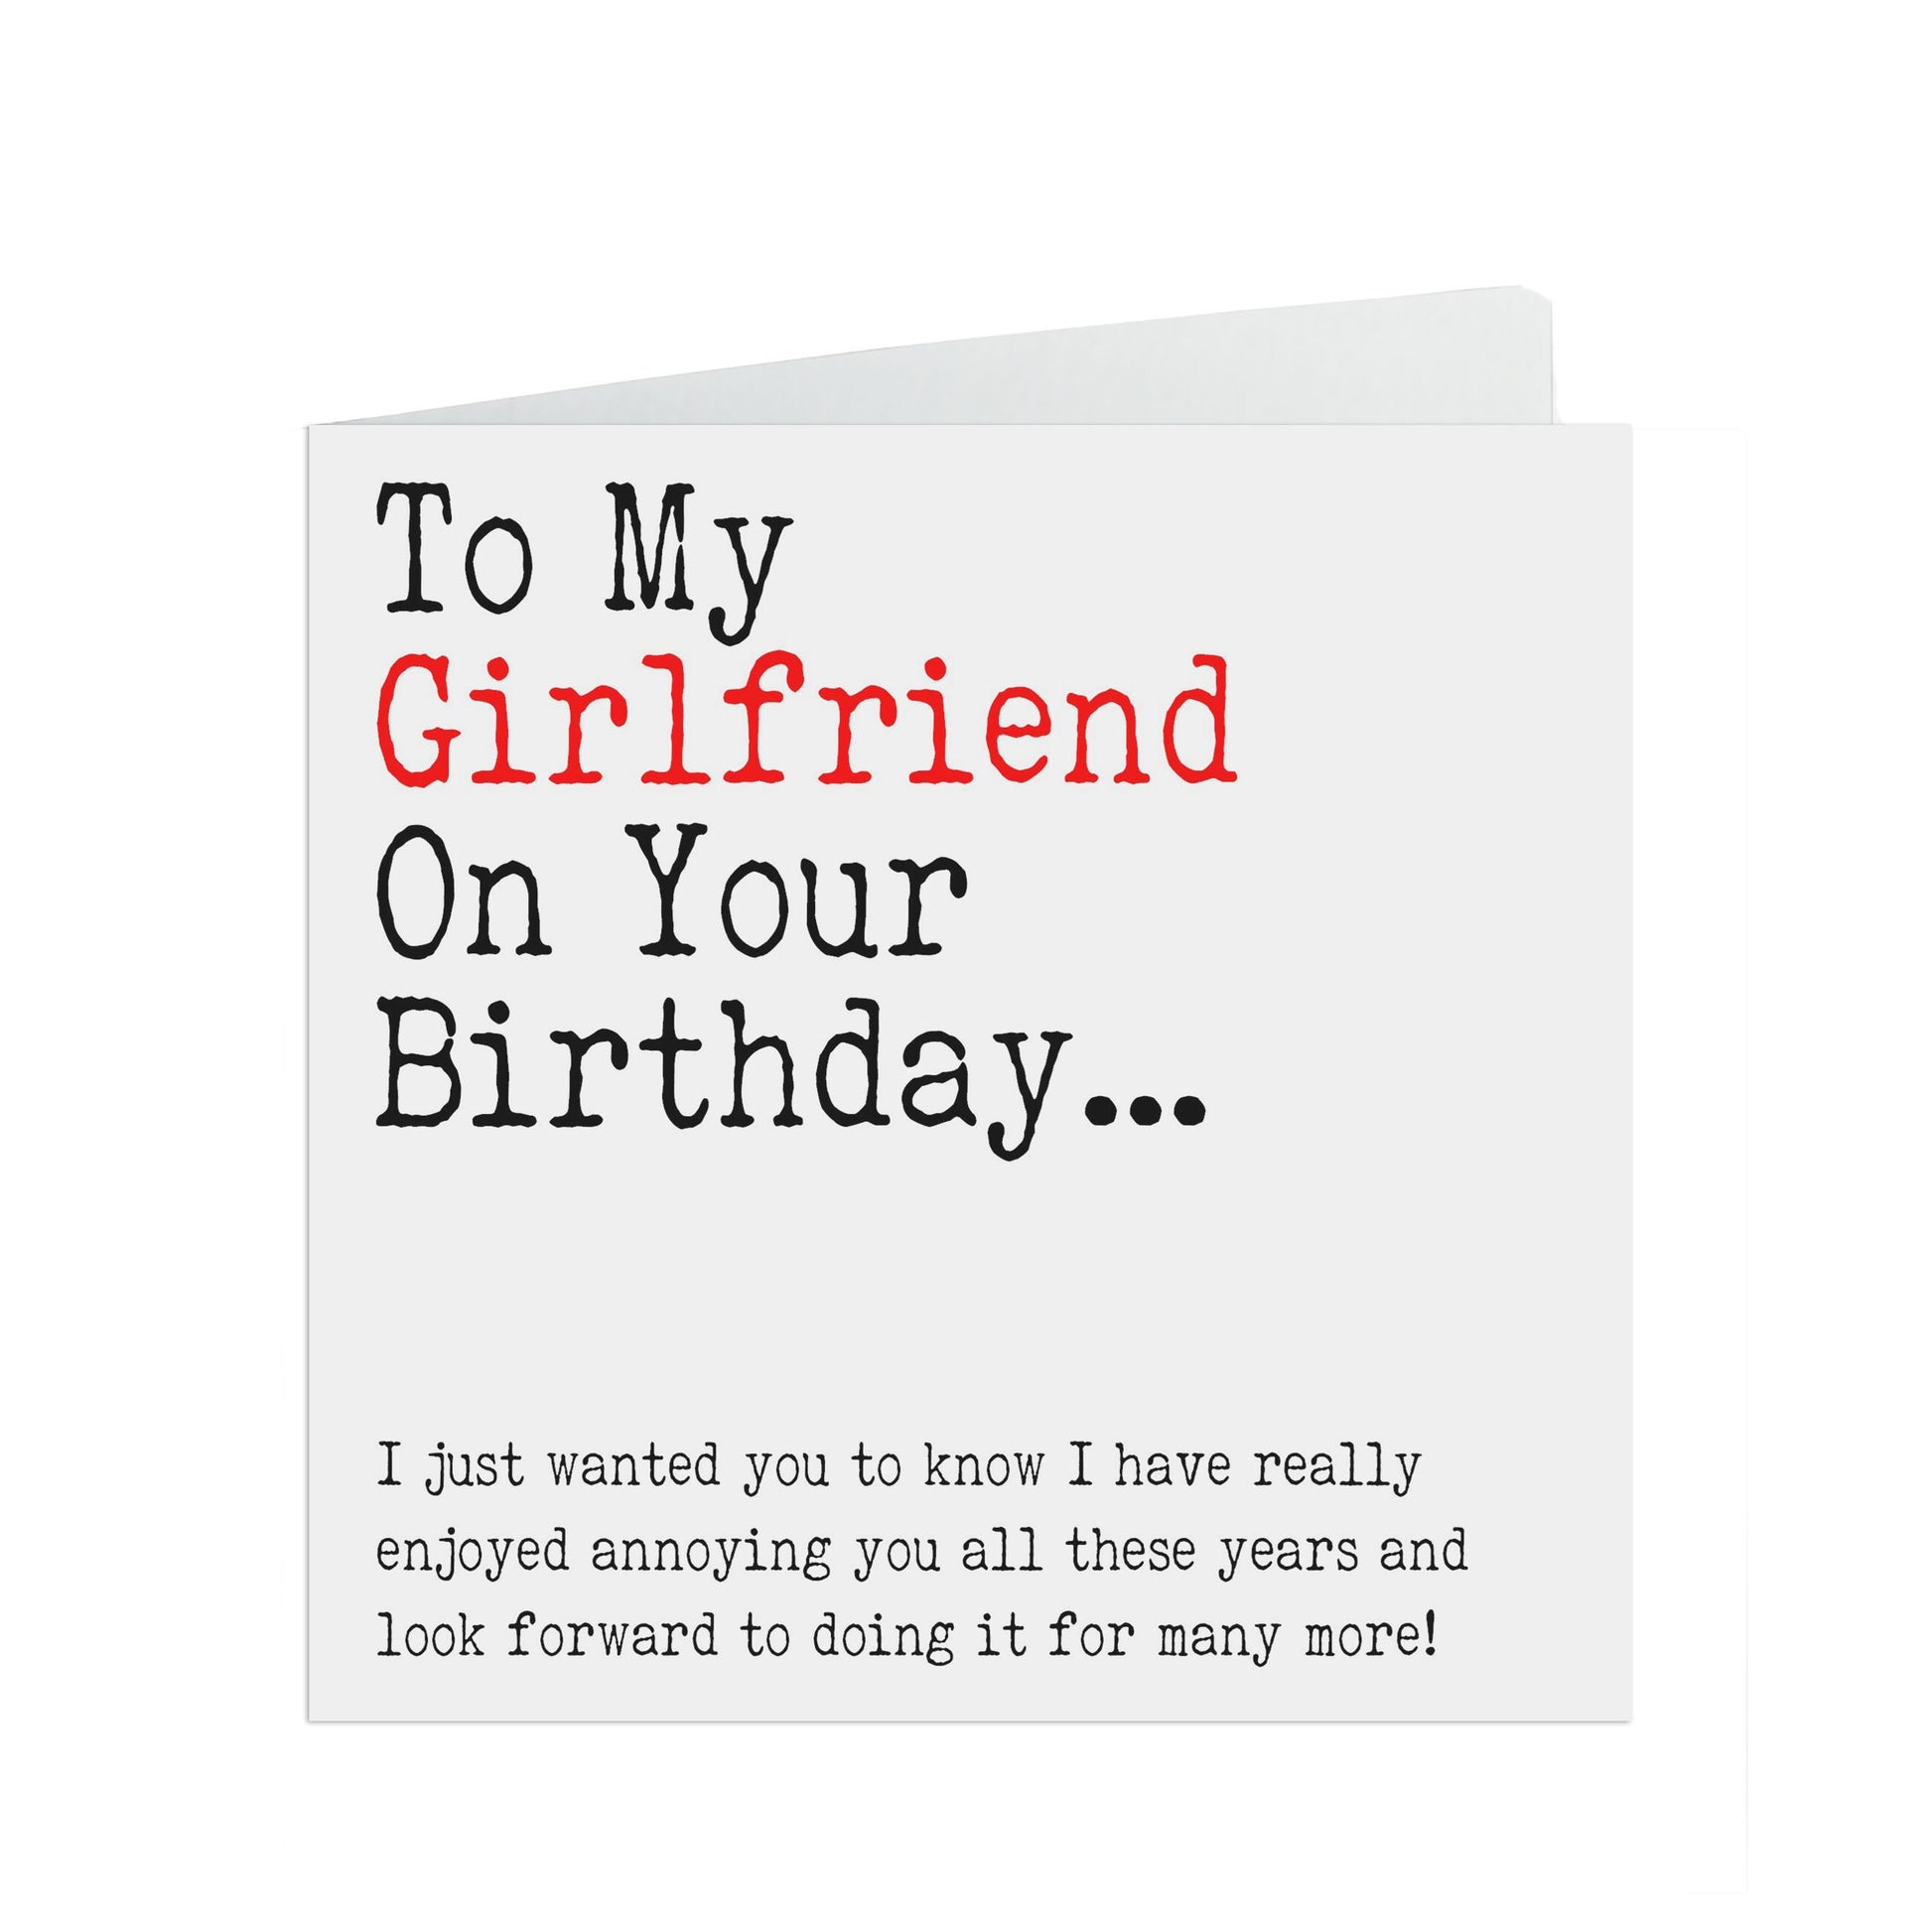 Girlfriend Birthday Card, I Have Really Enjoyed Annoying You All These Years